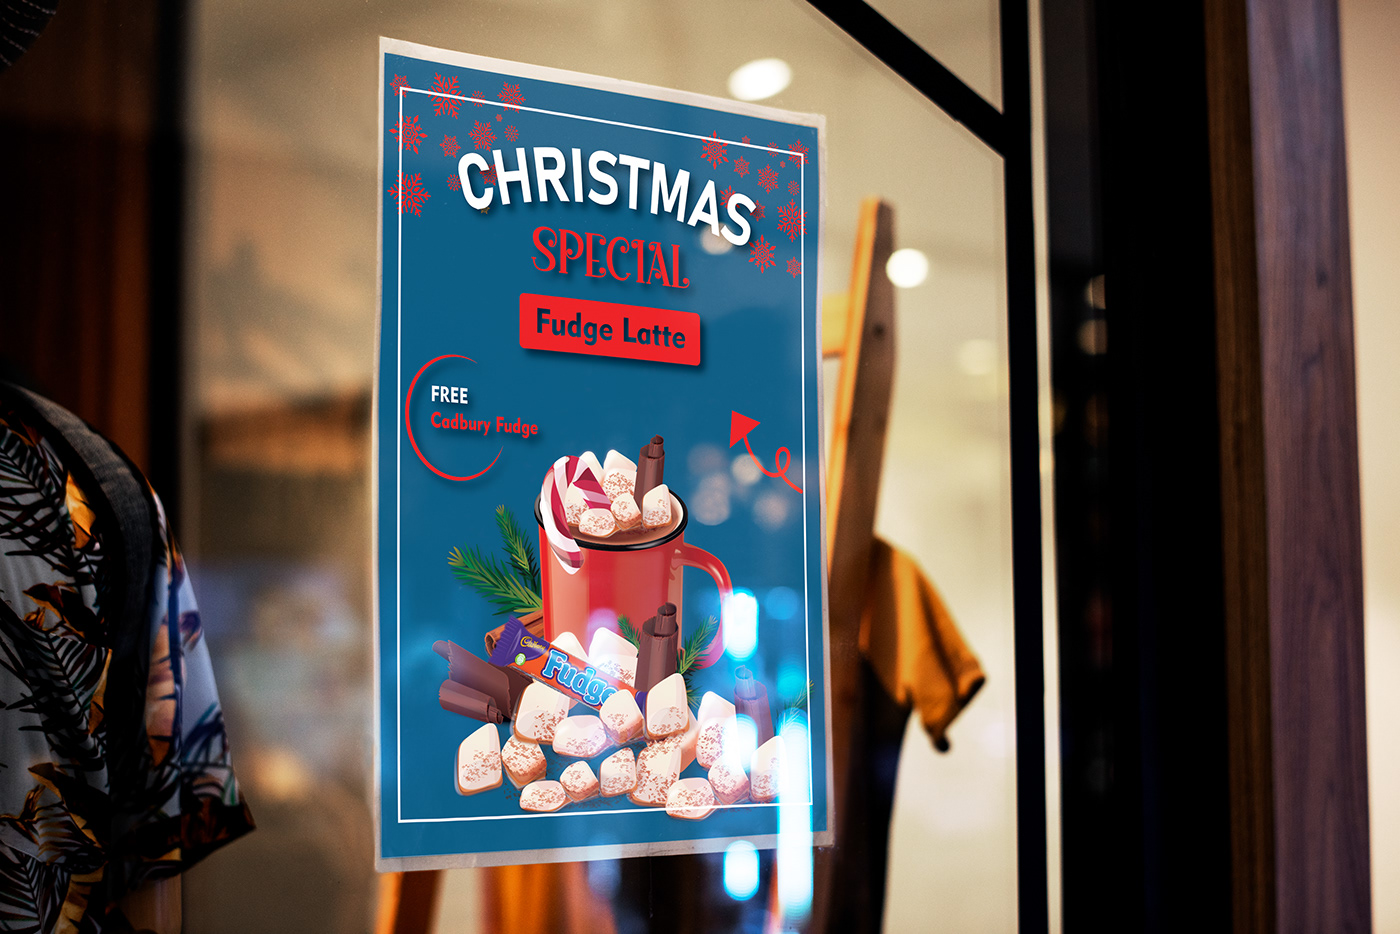 A4 Posters BEST POSTER Christmas Theme Posters creative posters Poster Design posters